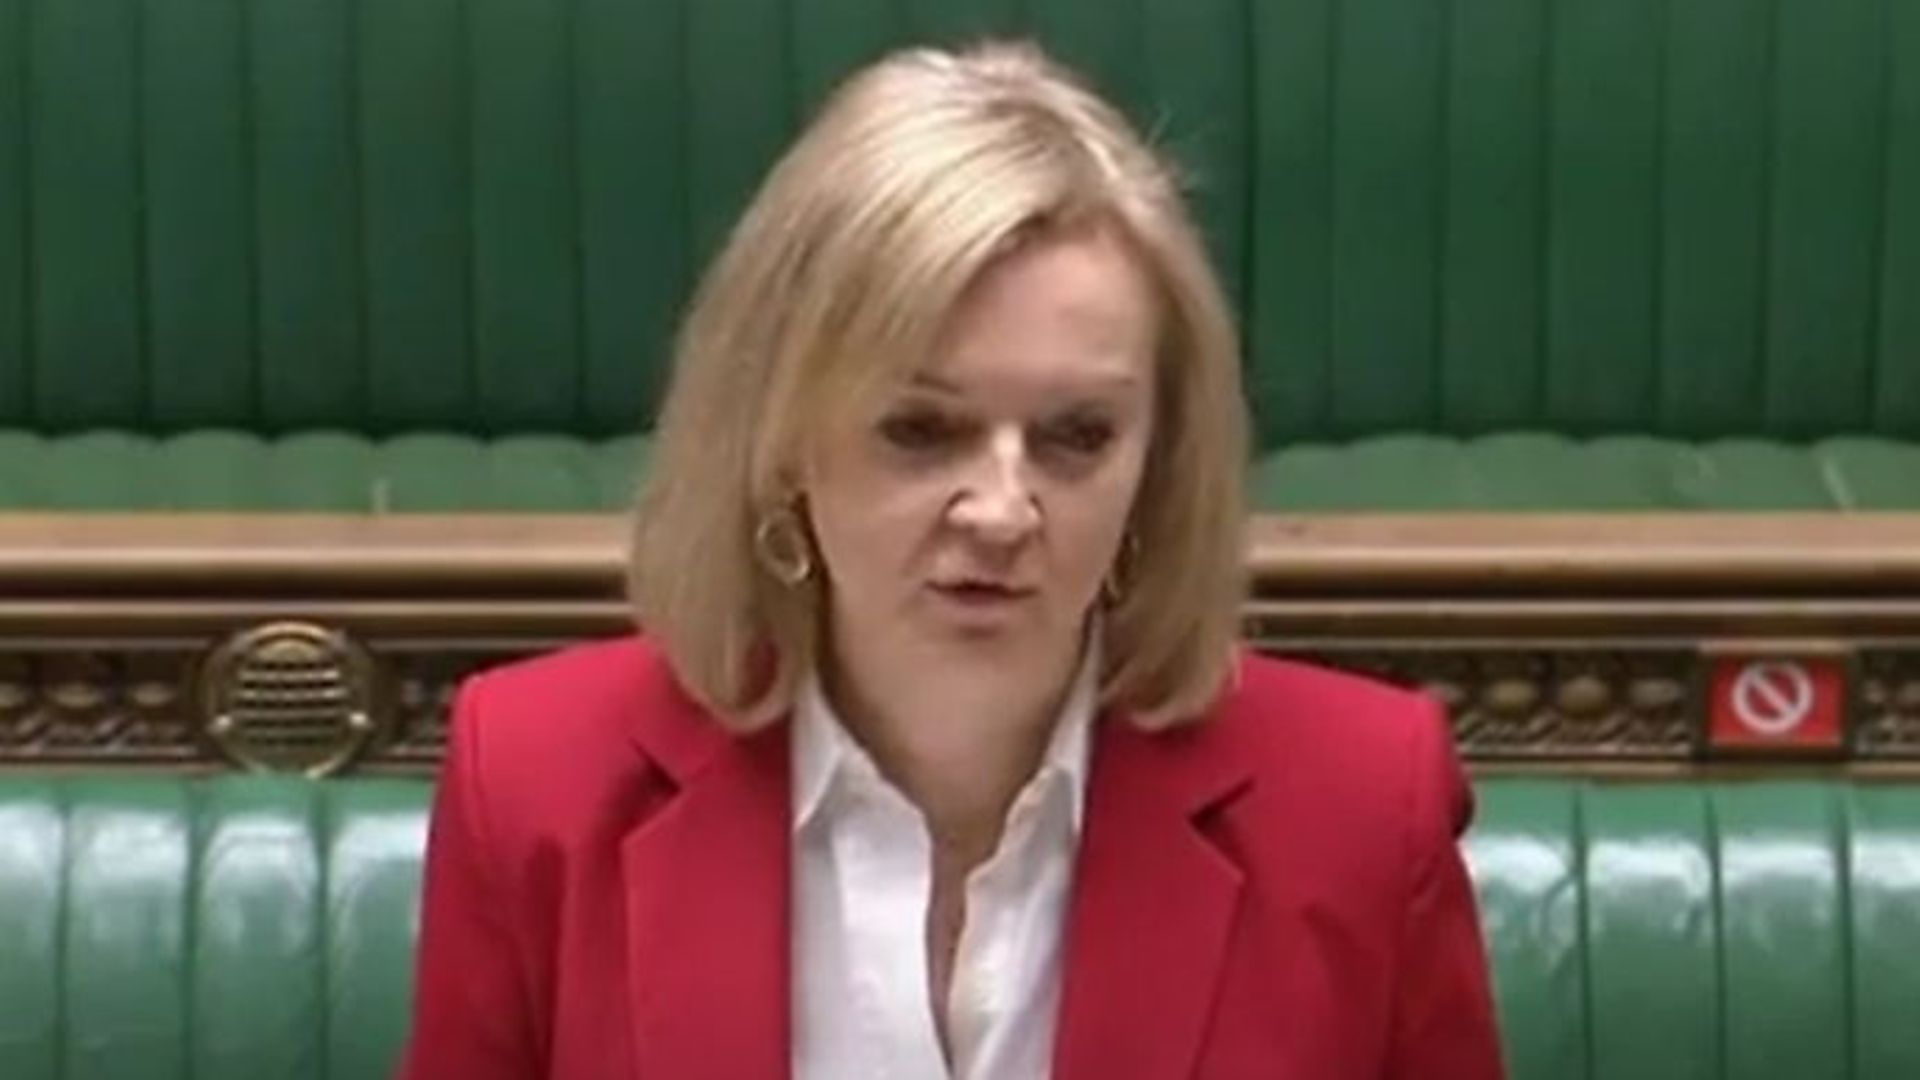 Liz Truss told MPs that new trade deals after Brexit will 'undermine' British farmers - Credit: Parliamentlive.tv